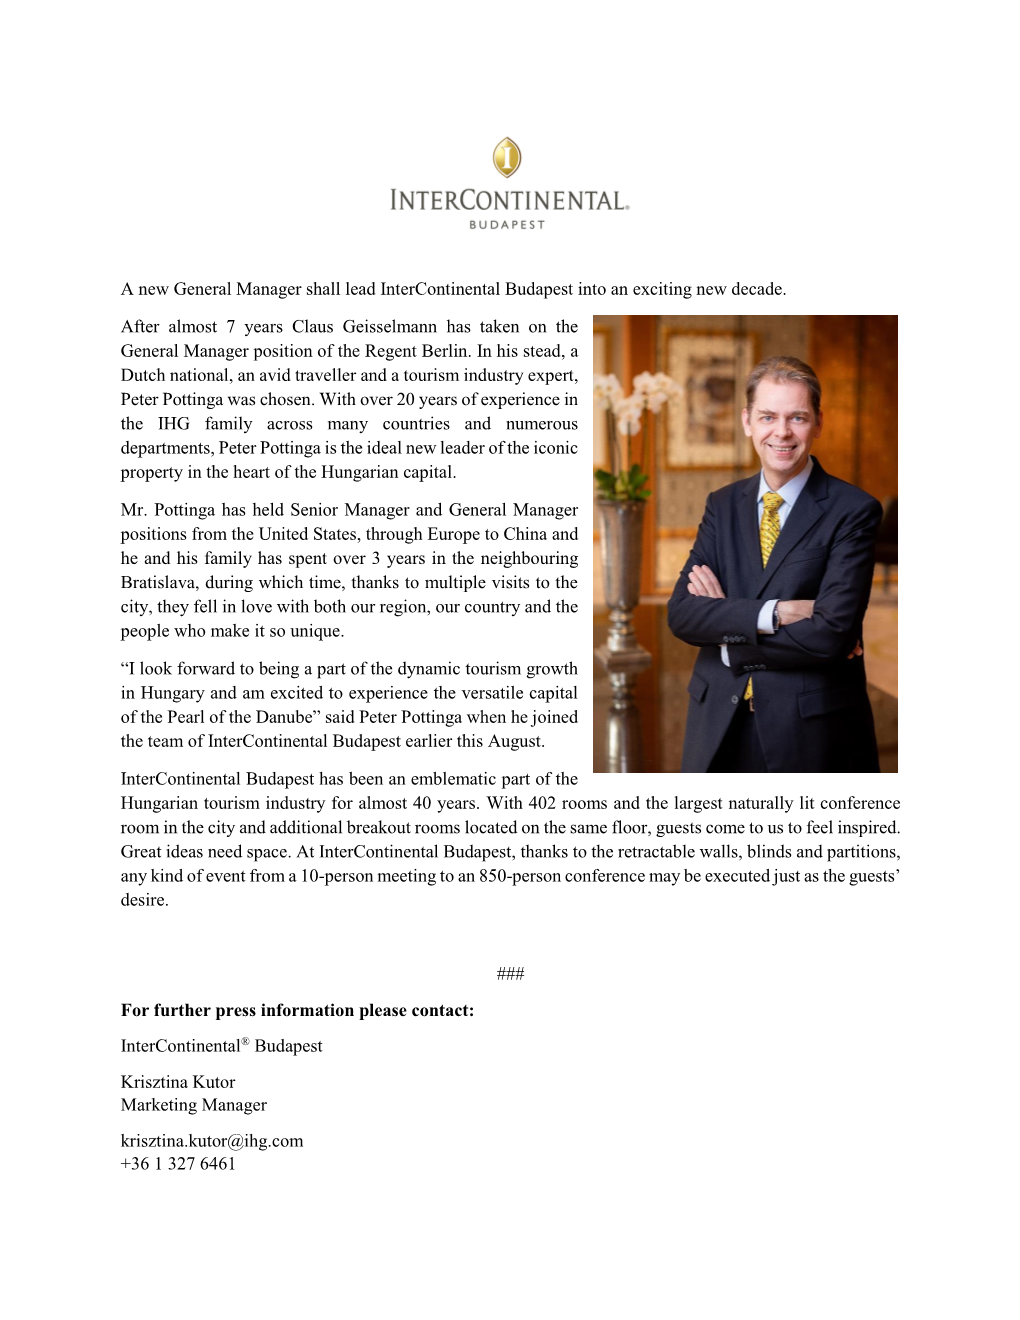 A New General Manager Shall Lead Intercontinental Budapest Into an Exciting New Decade